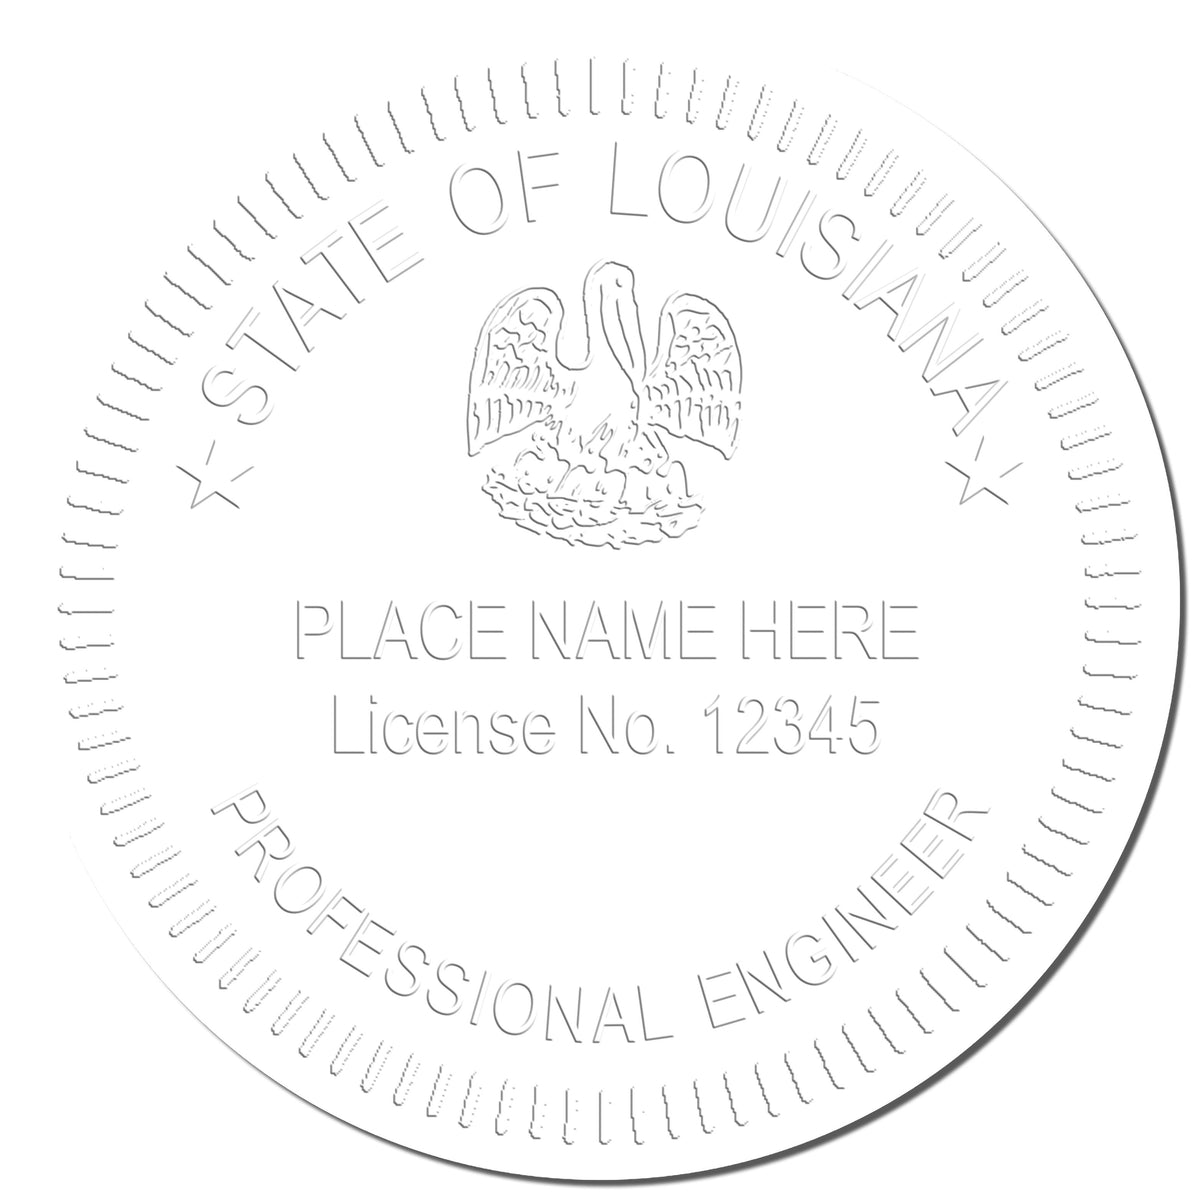 A photograph of the Handheld Louisiana Professional Engineer Embosser stamp impression reveals a vivid, professional image of the on paper.